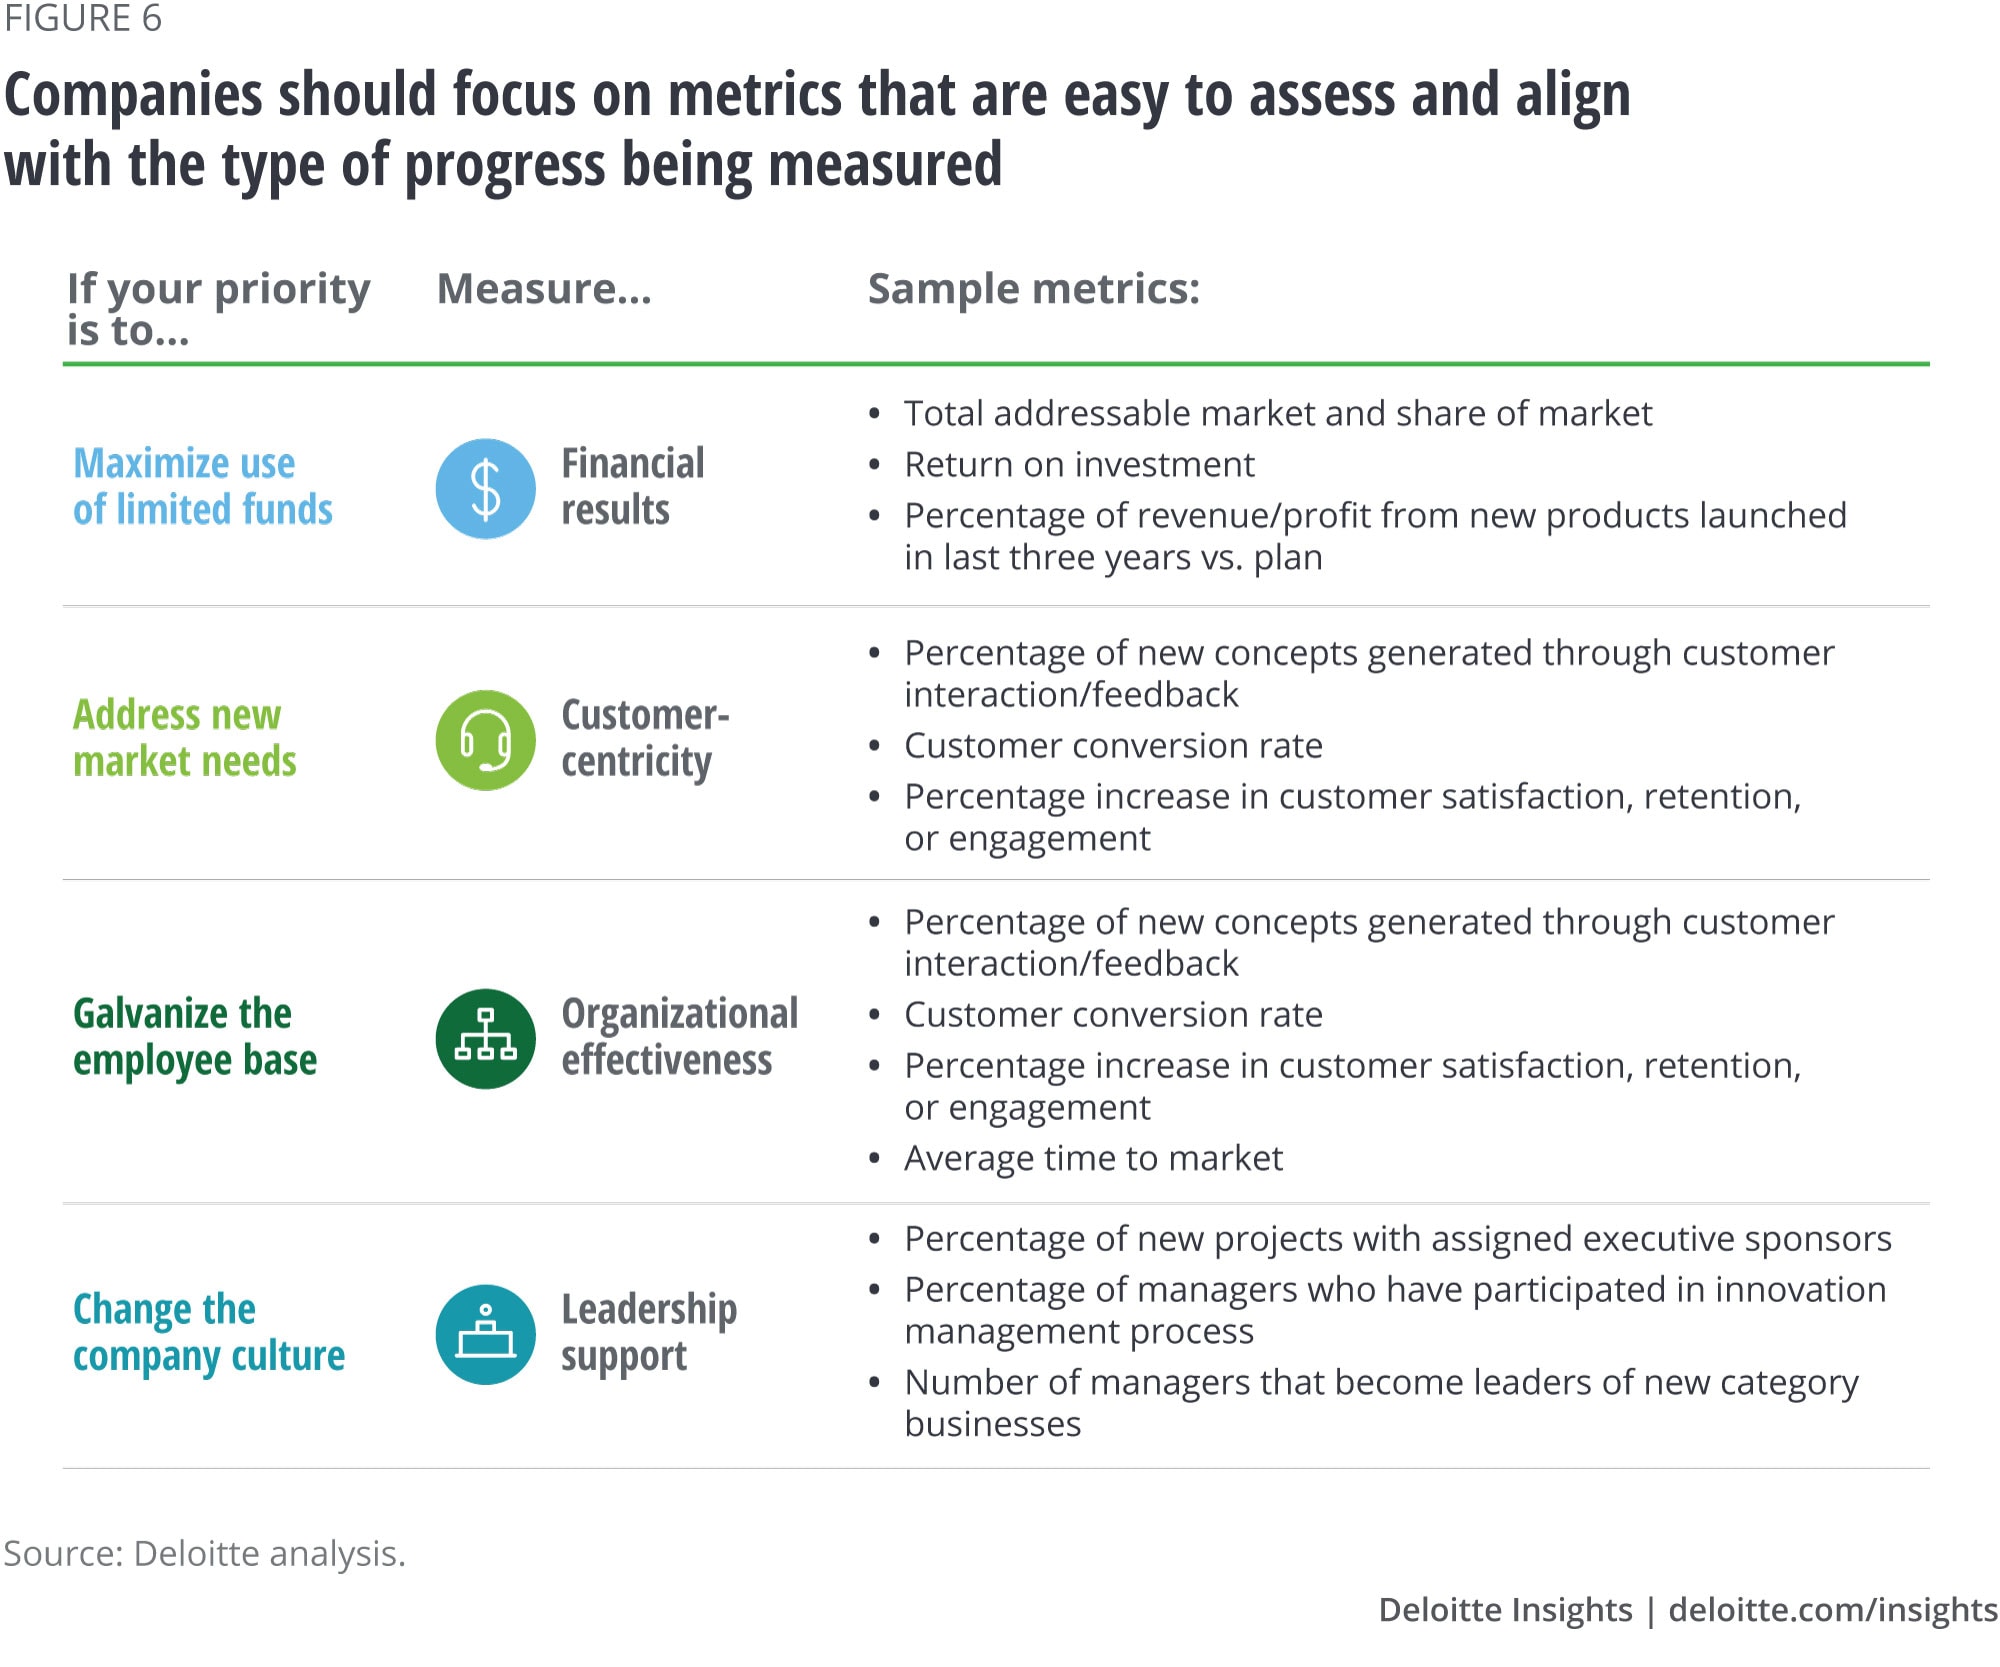 Companies should focus on metrics that are easy to assess and align with the type of progress being measured